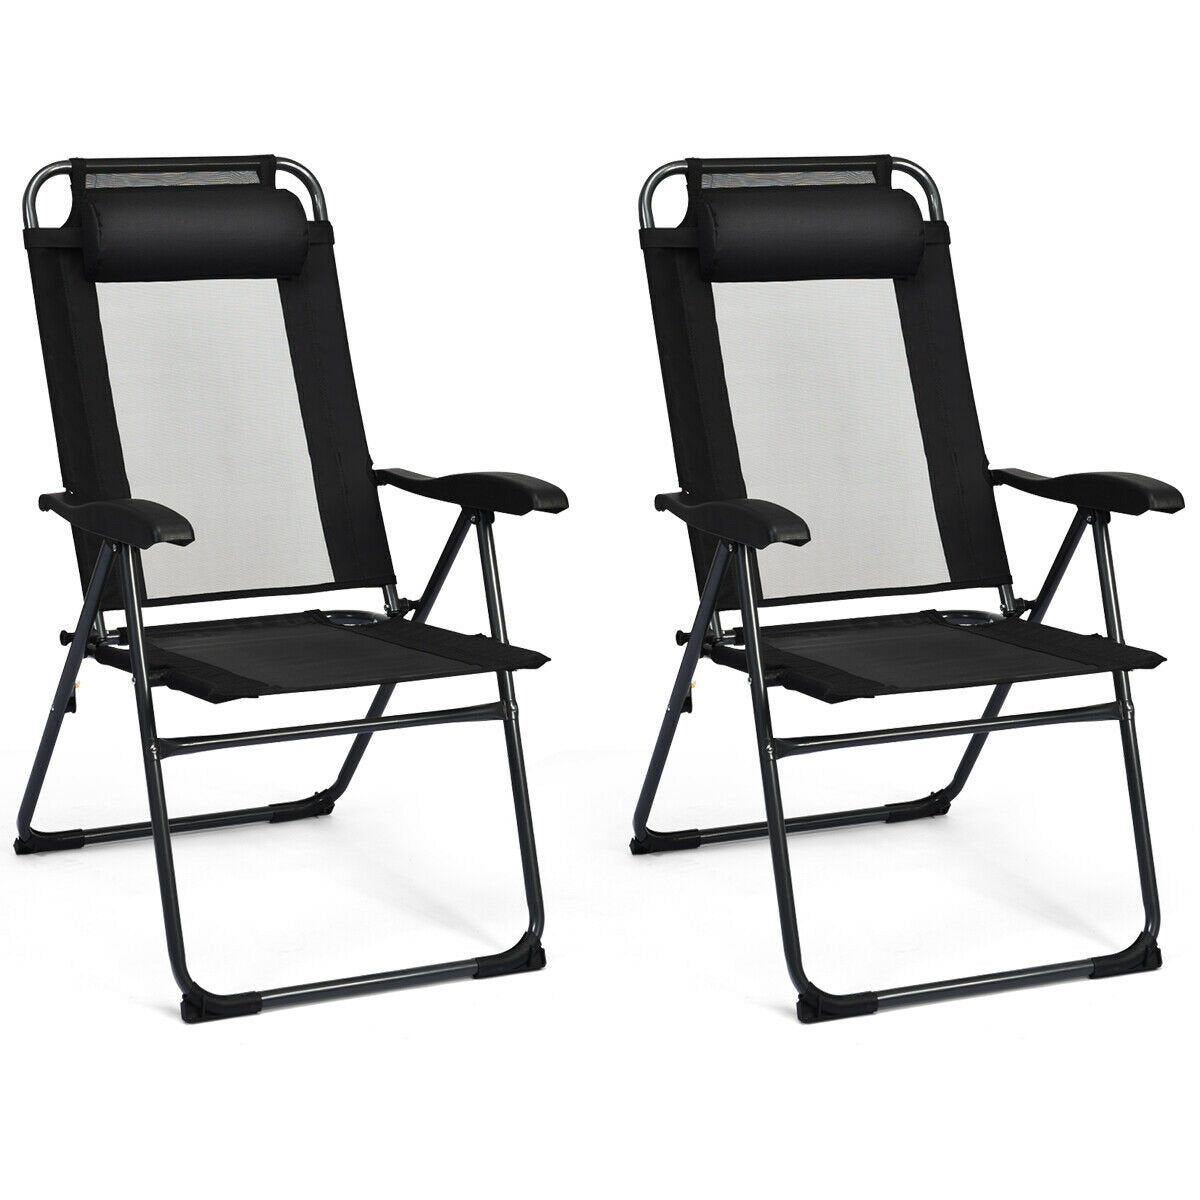 4 Pieces Patio Garden Adjustable Reclining Folding Chairs with Headrest, Black at Gallery Canada